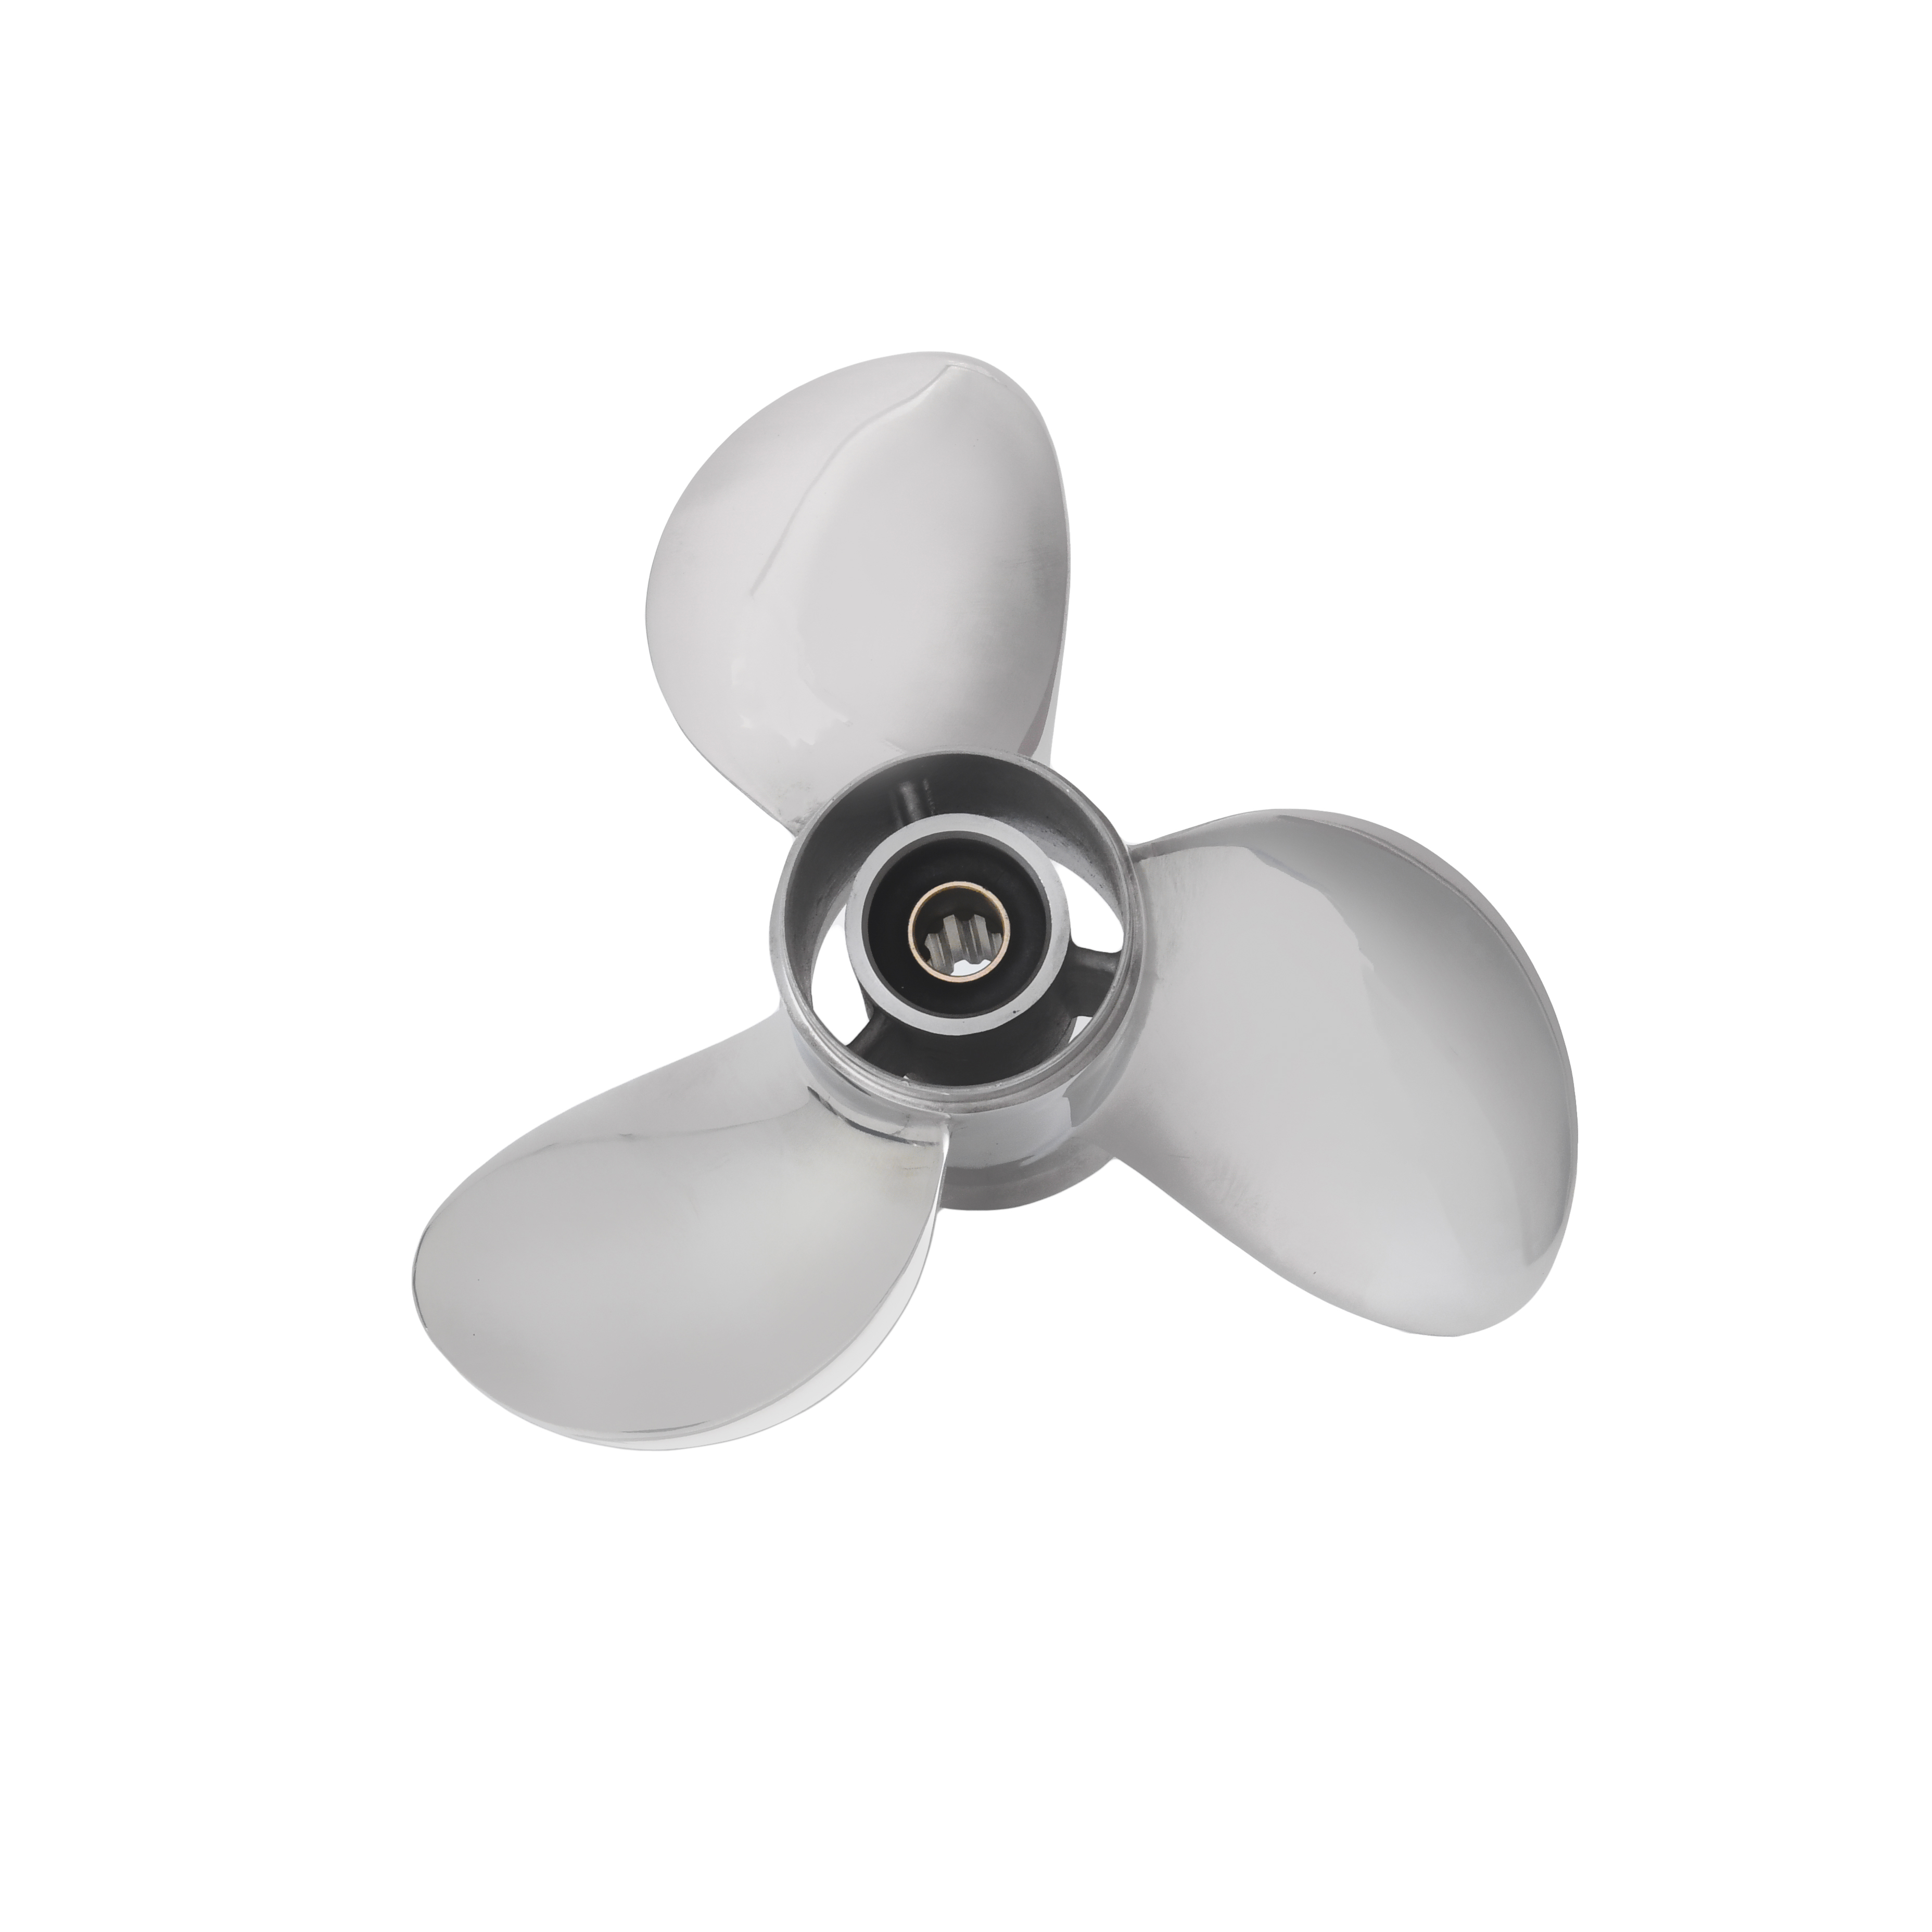 9.9-15HP Stainless Steel Outboard Propeller for YAMAHA 